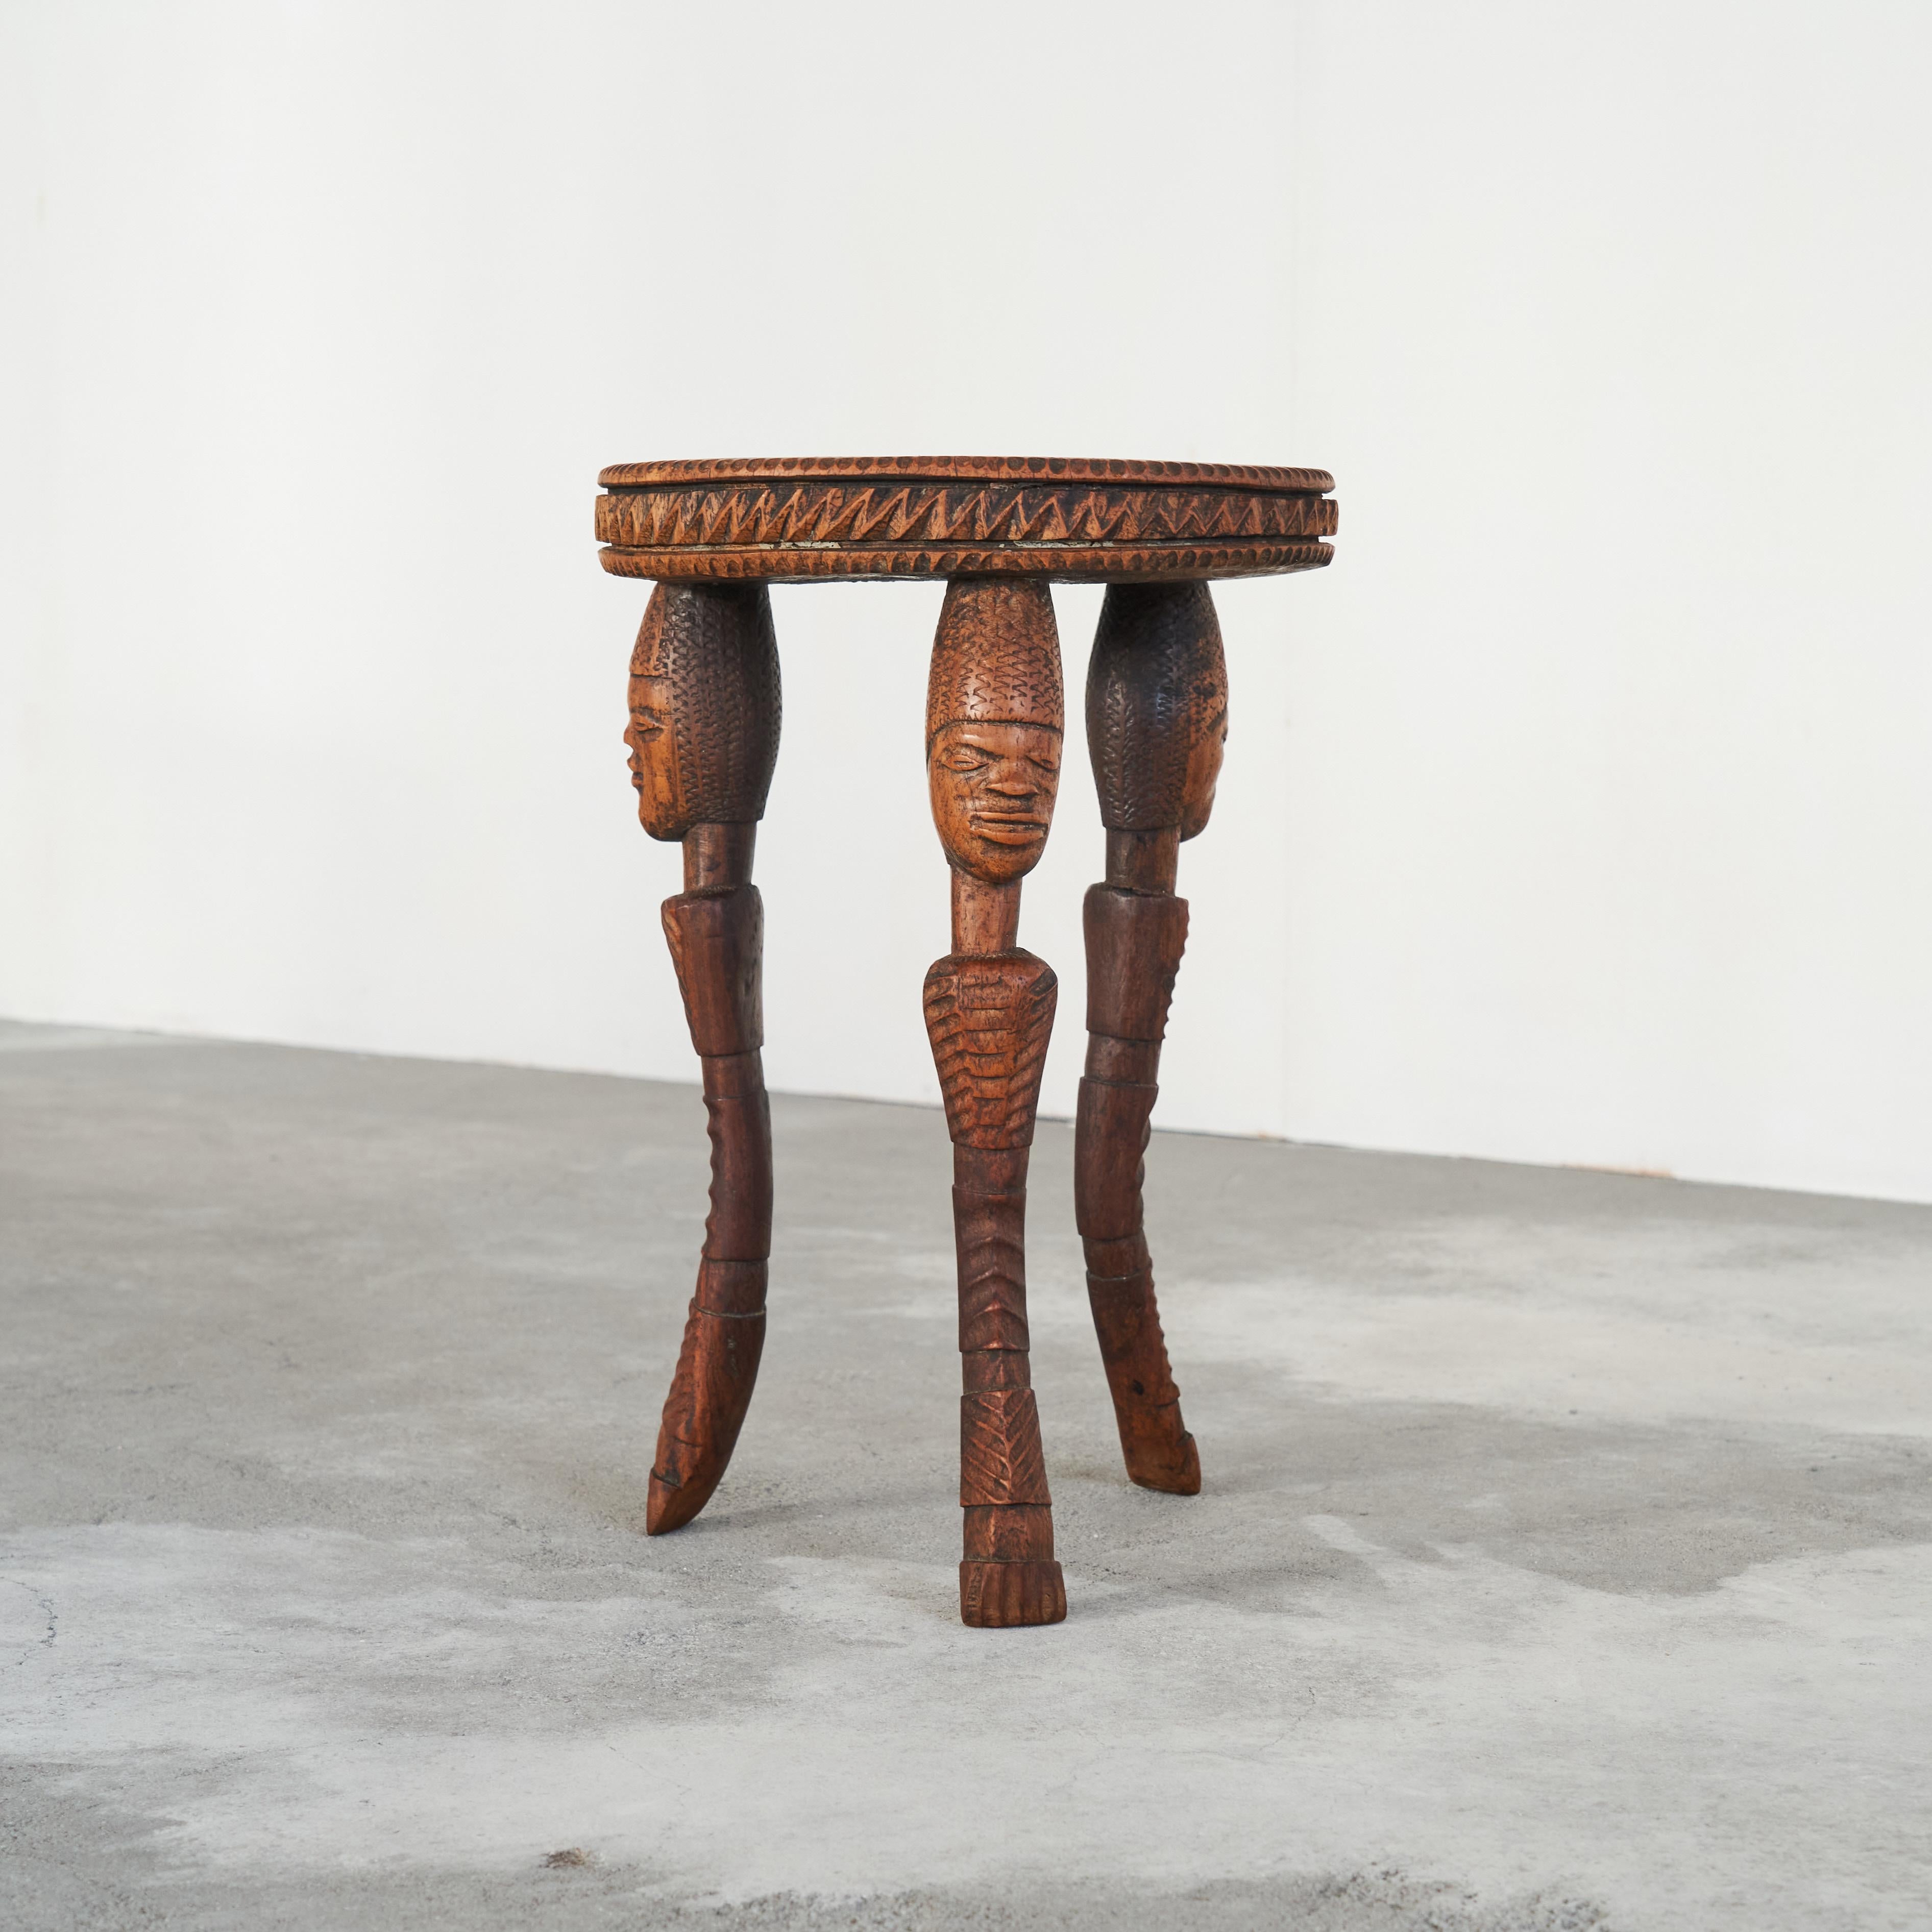 Antique African Side Table in Carved Solid Wood and Inlayed Bone.

Wonderful and hand made side table in carved solid wood with inlayed pieces of bone in the top. A true quality piece of African folk art, this table has a very distinct appearance